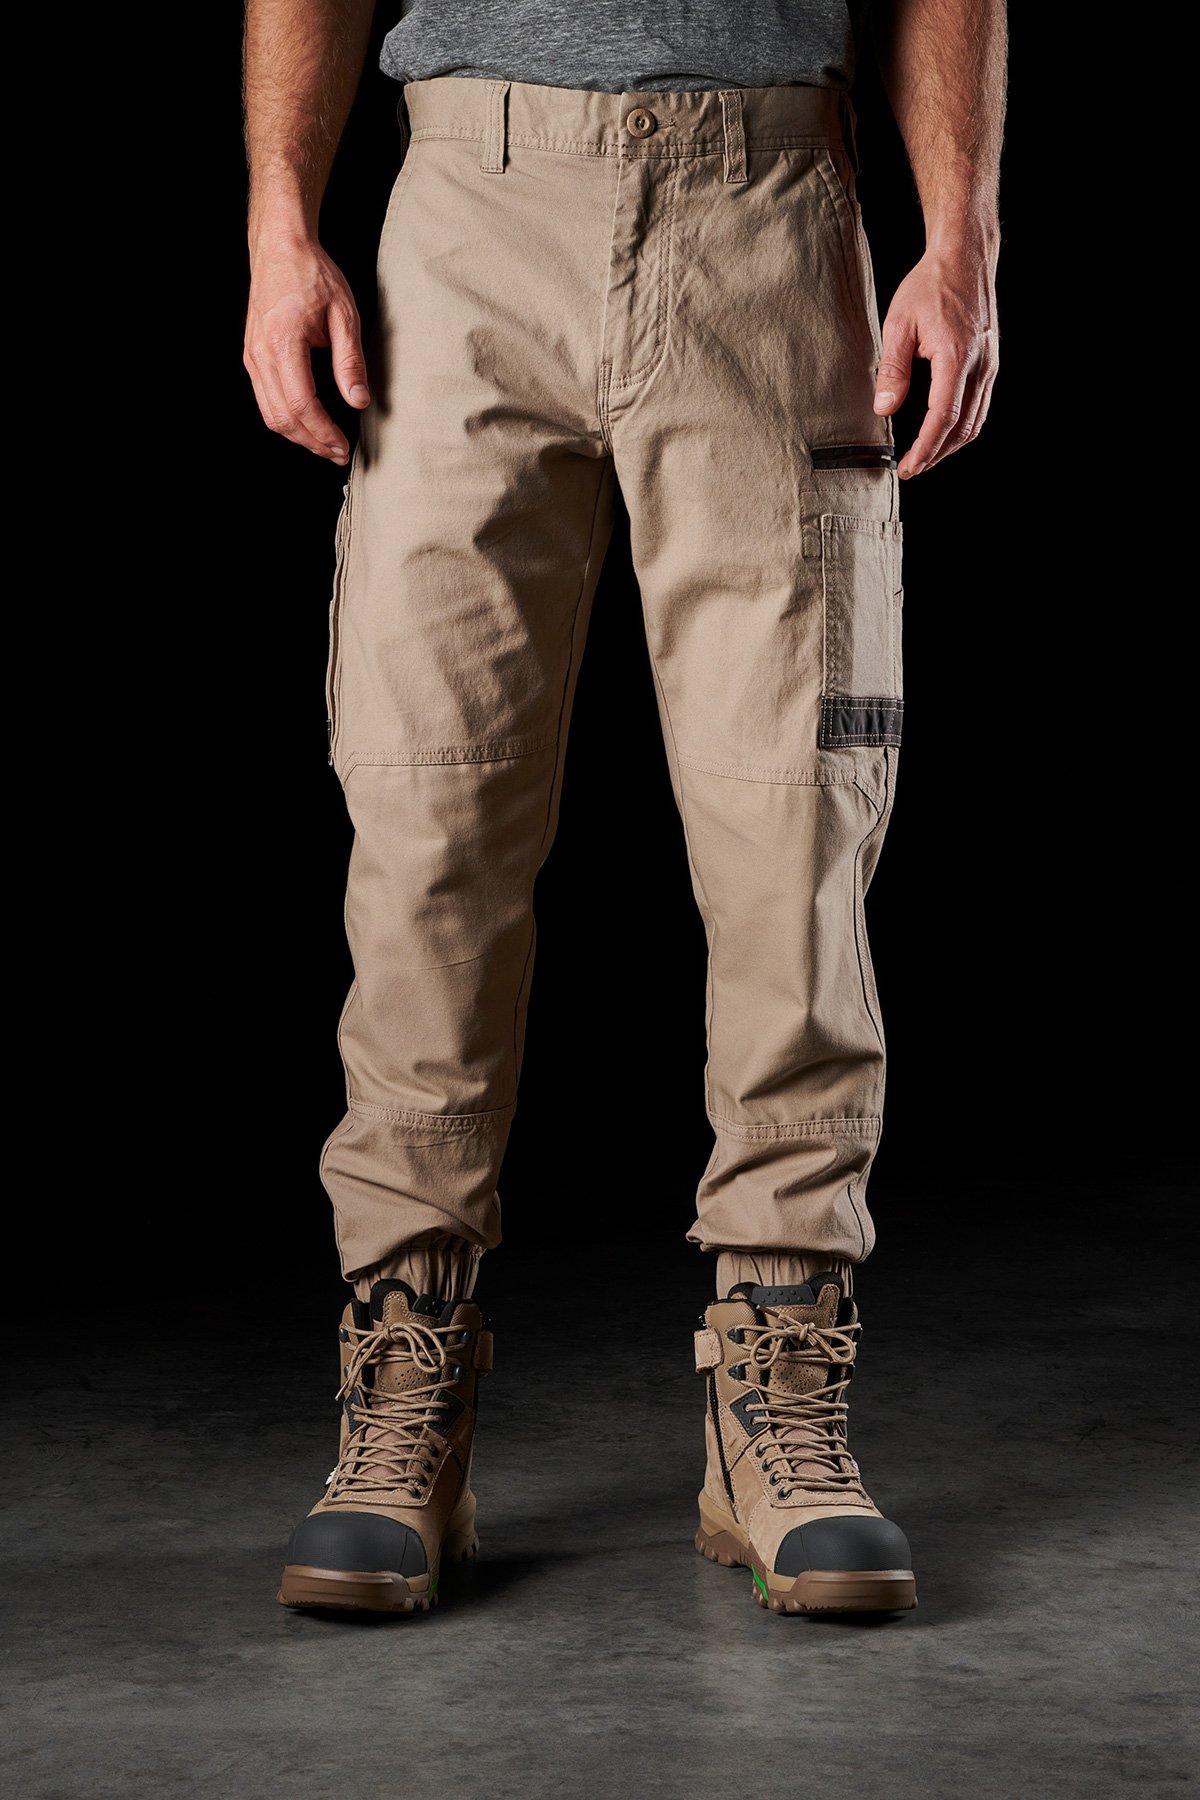 FXD WP-4 Stretch Cuffed Pants - WP-4 - Federal Workwear